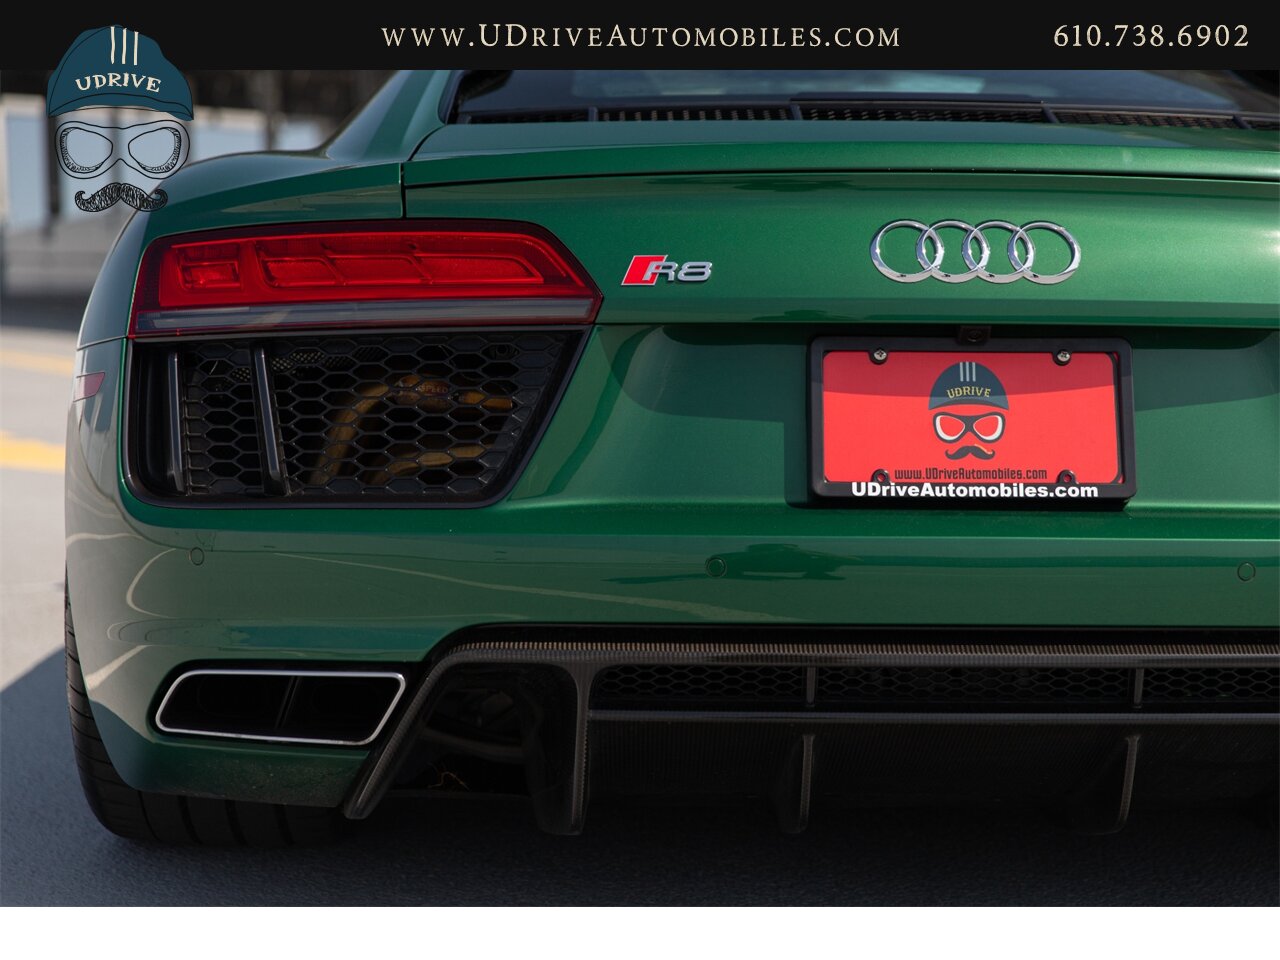 2017 Audi R8 Audi Exclusive Avocado Green Vermont Brown Leather  Diamond Stitching V10 Carbon Fiber - Photo 25 - West Chester, PA 19382